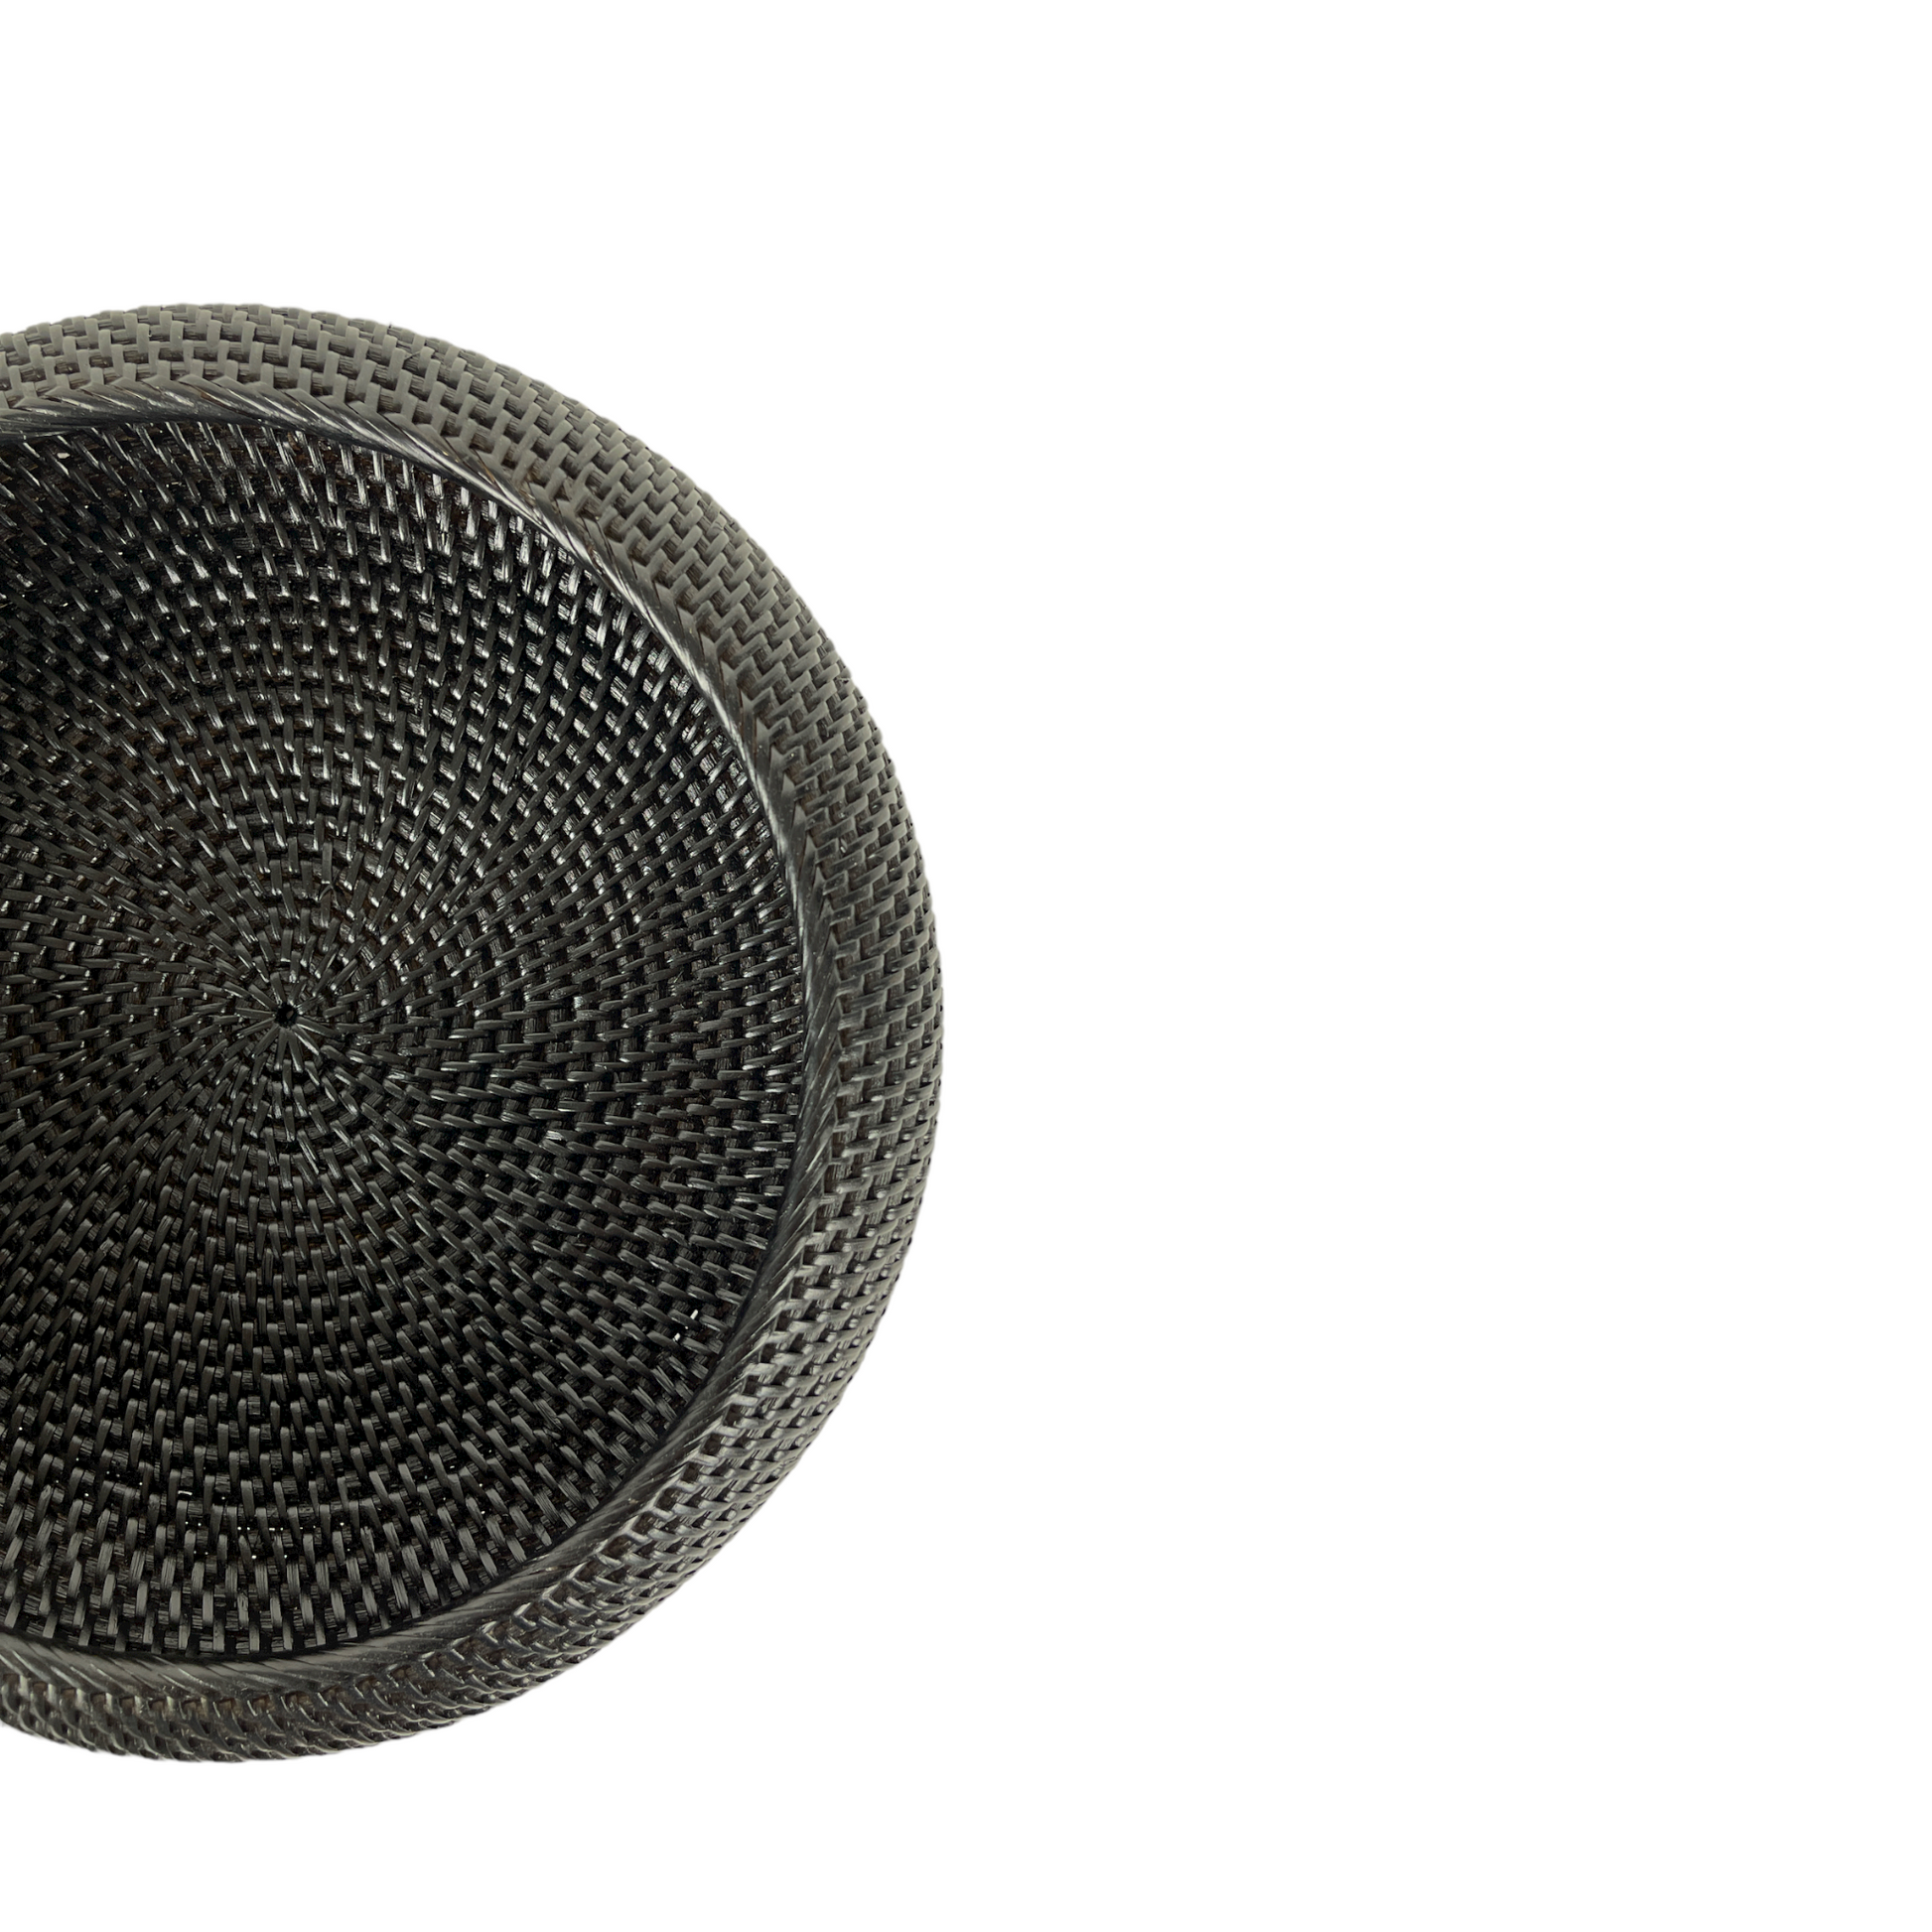 Get ready to elevate your home decor with our Bergaya Black Rattan Bowl. Carefully crafted with an artful touch, this stylish piece will add a beautiful texture to any room, instantly capturing attention and admiration. Top.